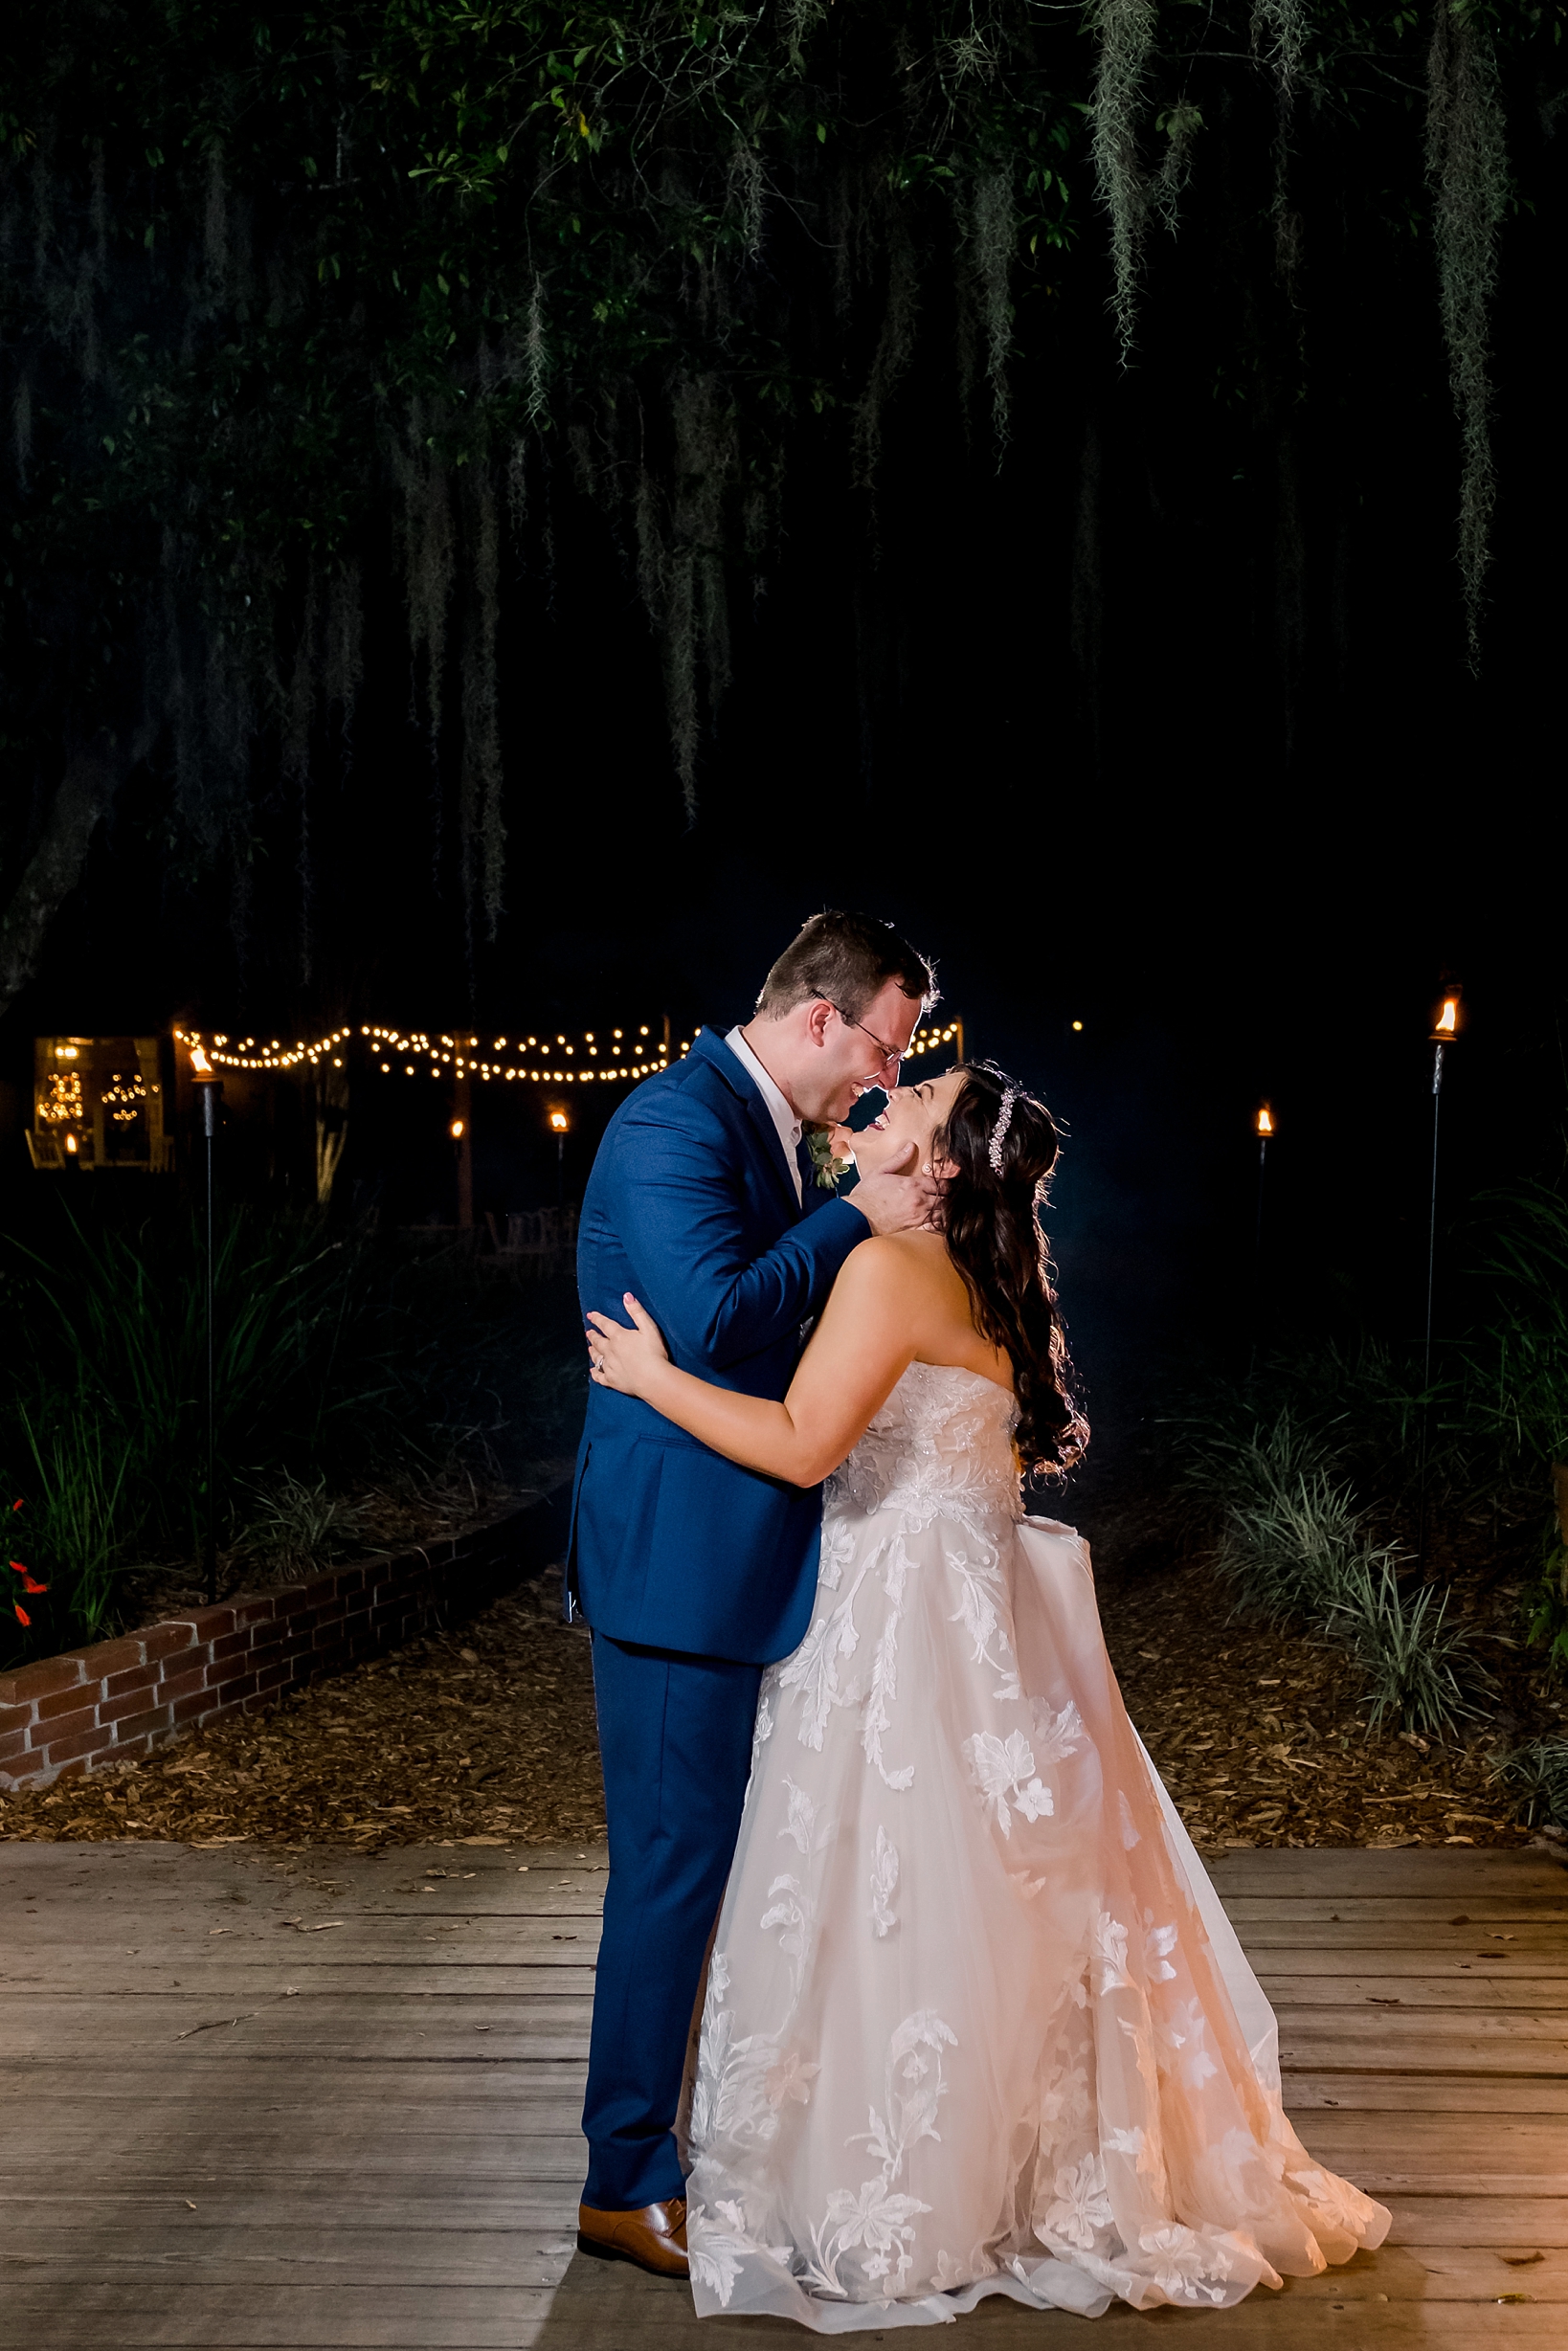 Bride and Groom share a kiss under the stars